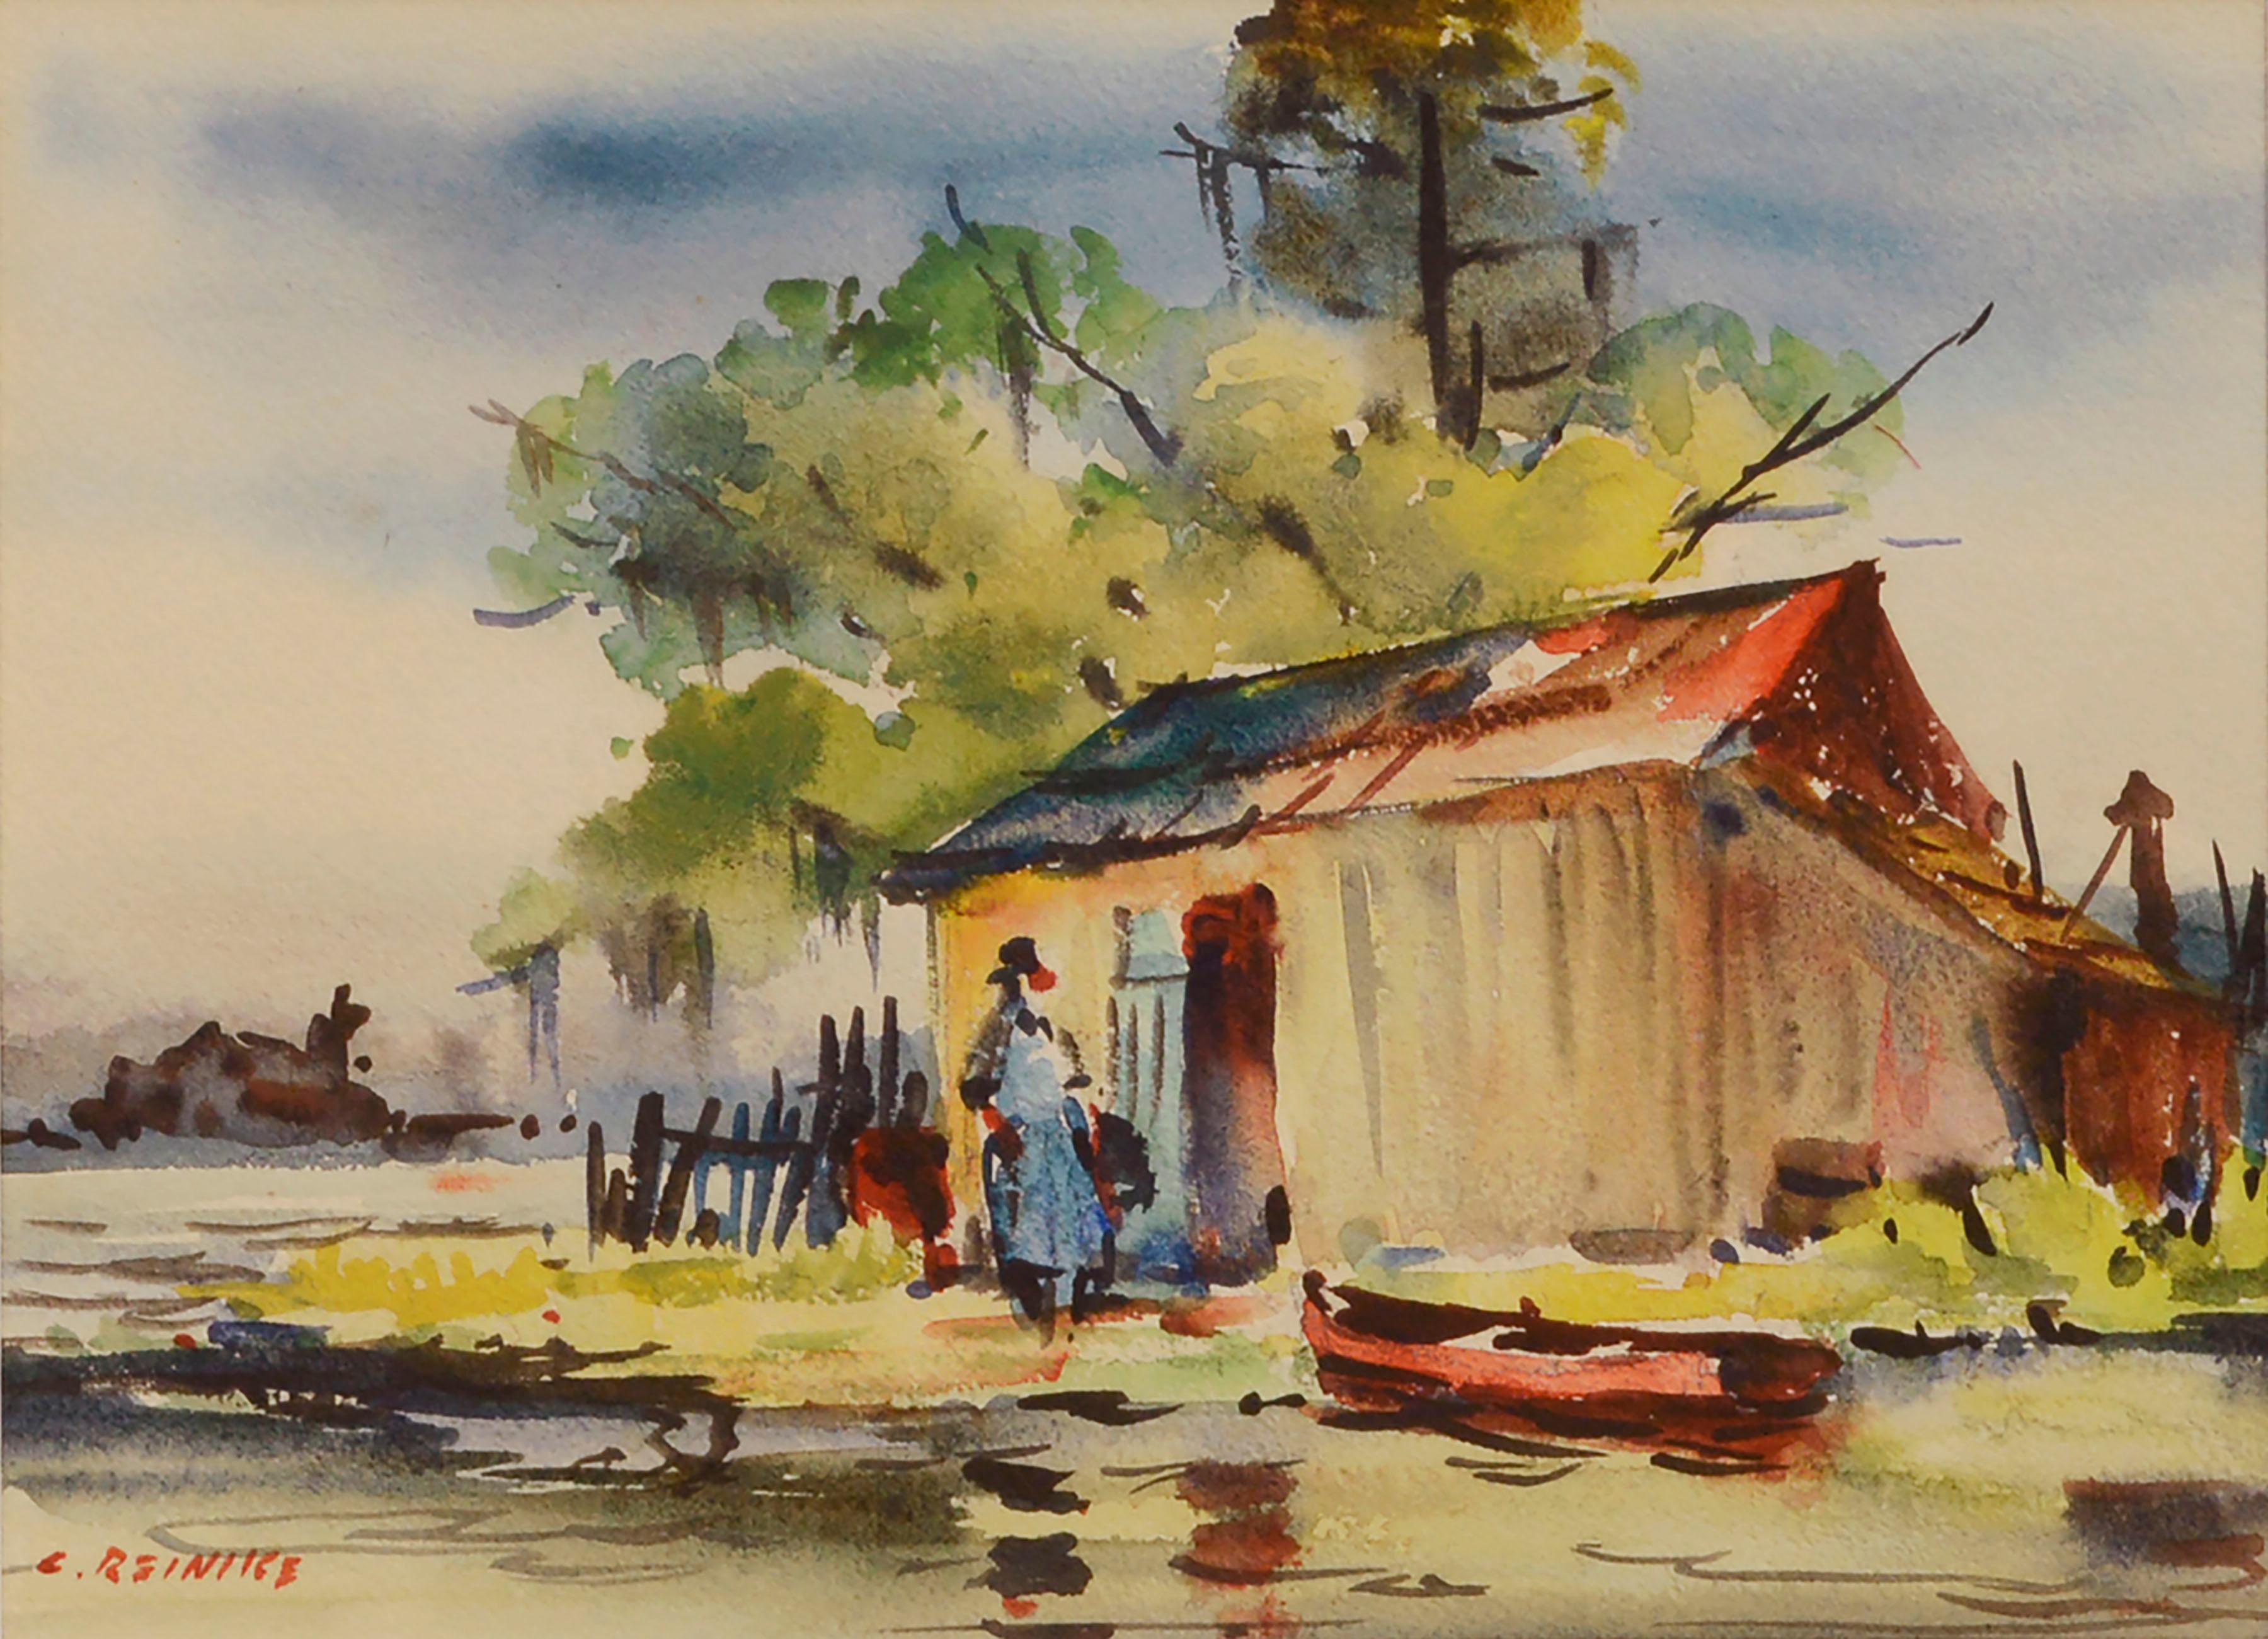 On the Bayou, Figurative Landscape Watercolor by Charles Reinike Sr. 1